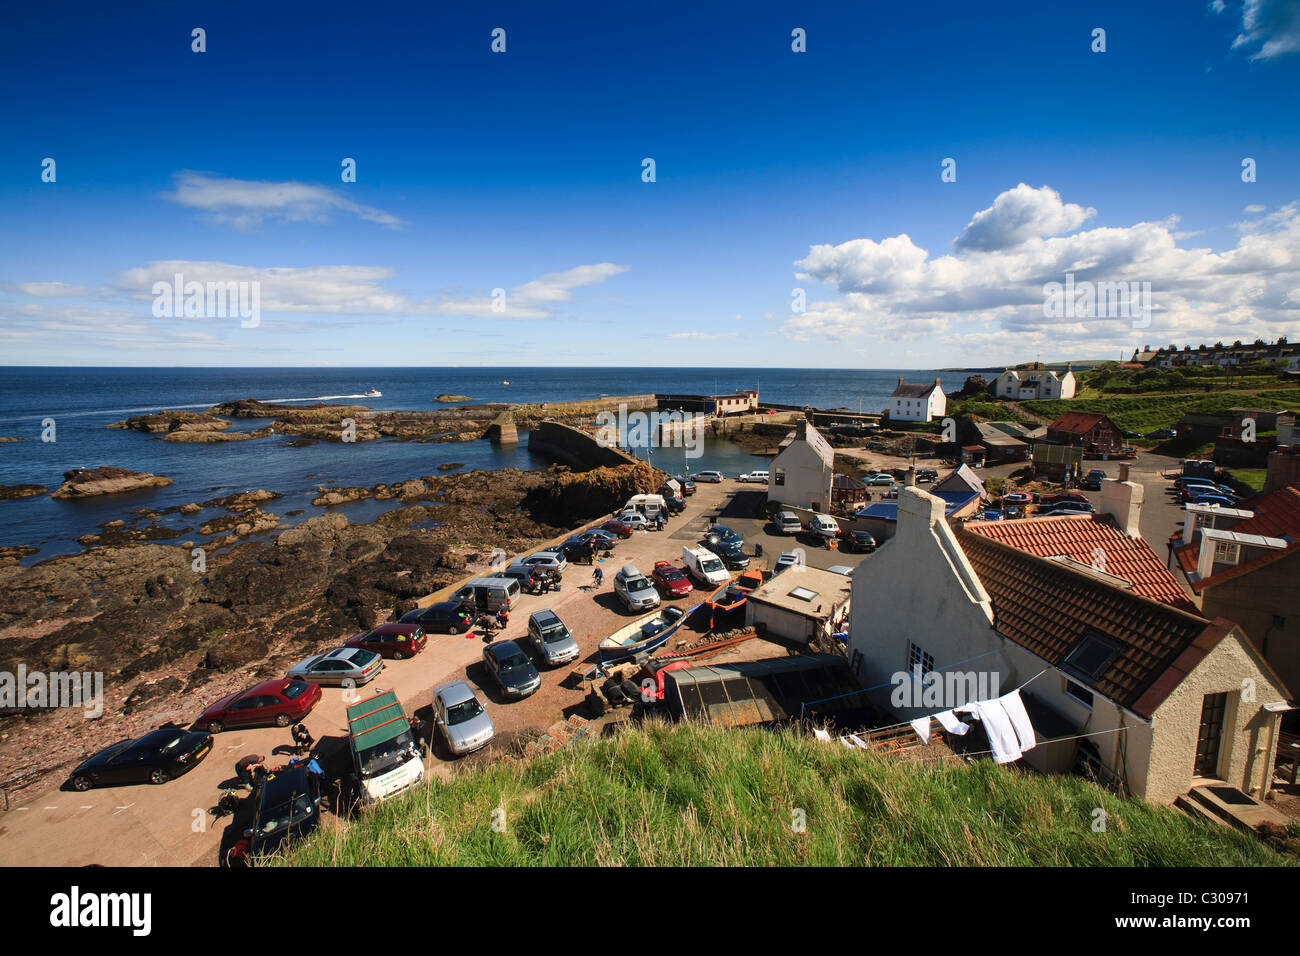 Divers ready themselves in the carpark at St.Abbs harbour. Stock Photo